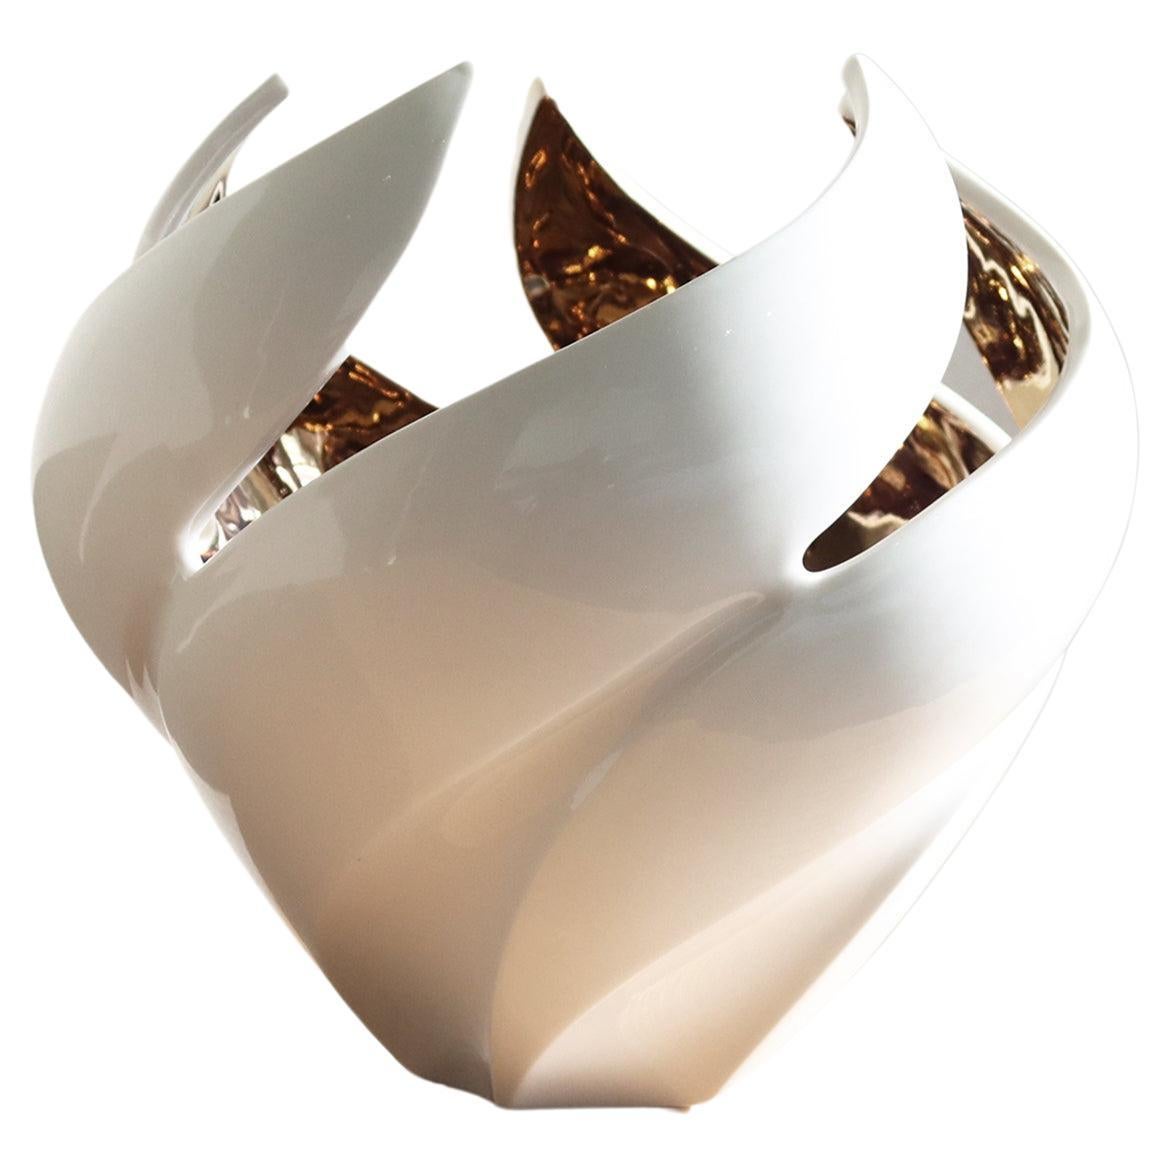 The Twisted Vessel is an exquisite piece of art that truly captures the spontaneity and beauty of nature. Whether you choose to display it as a sculptural masterpiece or as a functional vase for your favourite blooms, this vessel is sure to add a